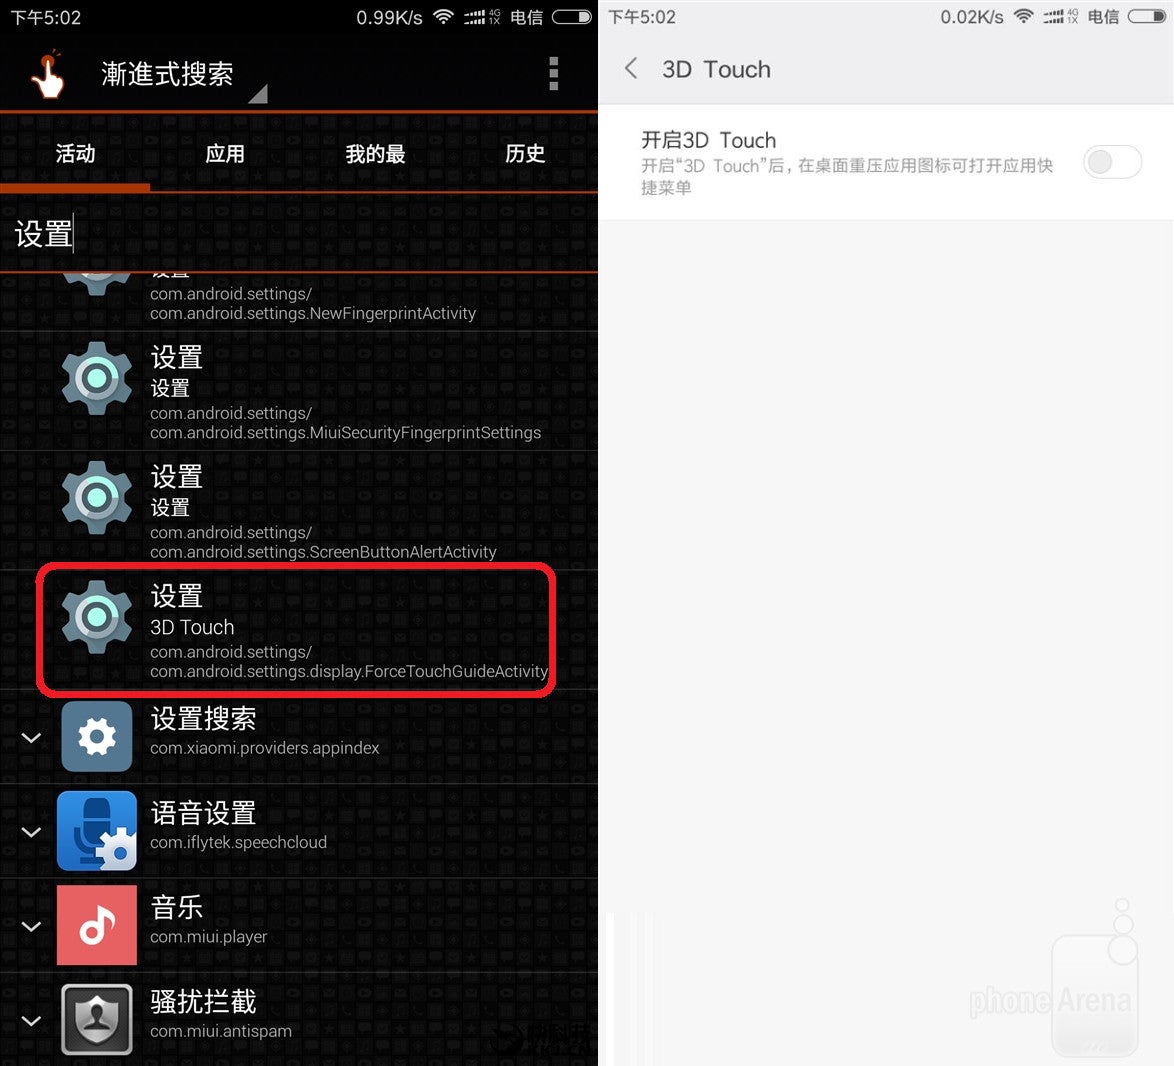 Xiaomi Mi Note 2's curved display may include 3D touch support